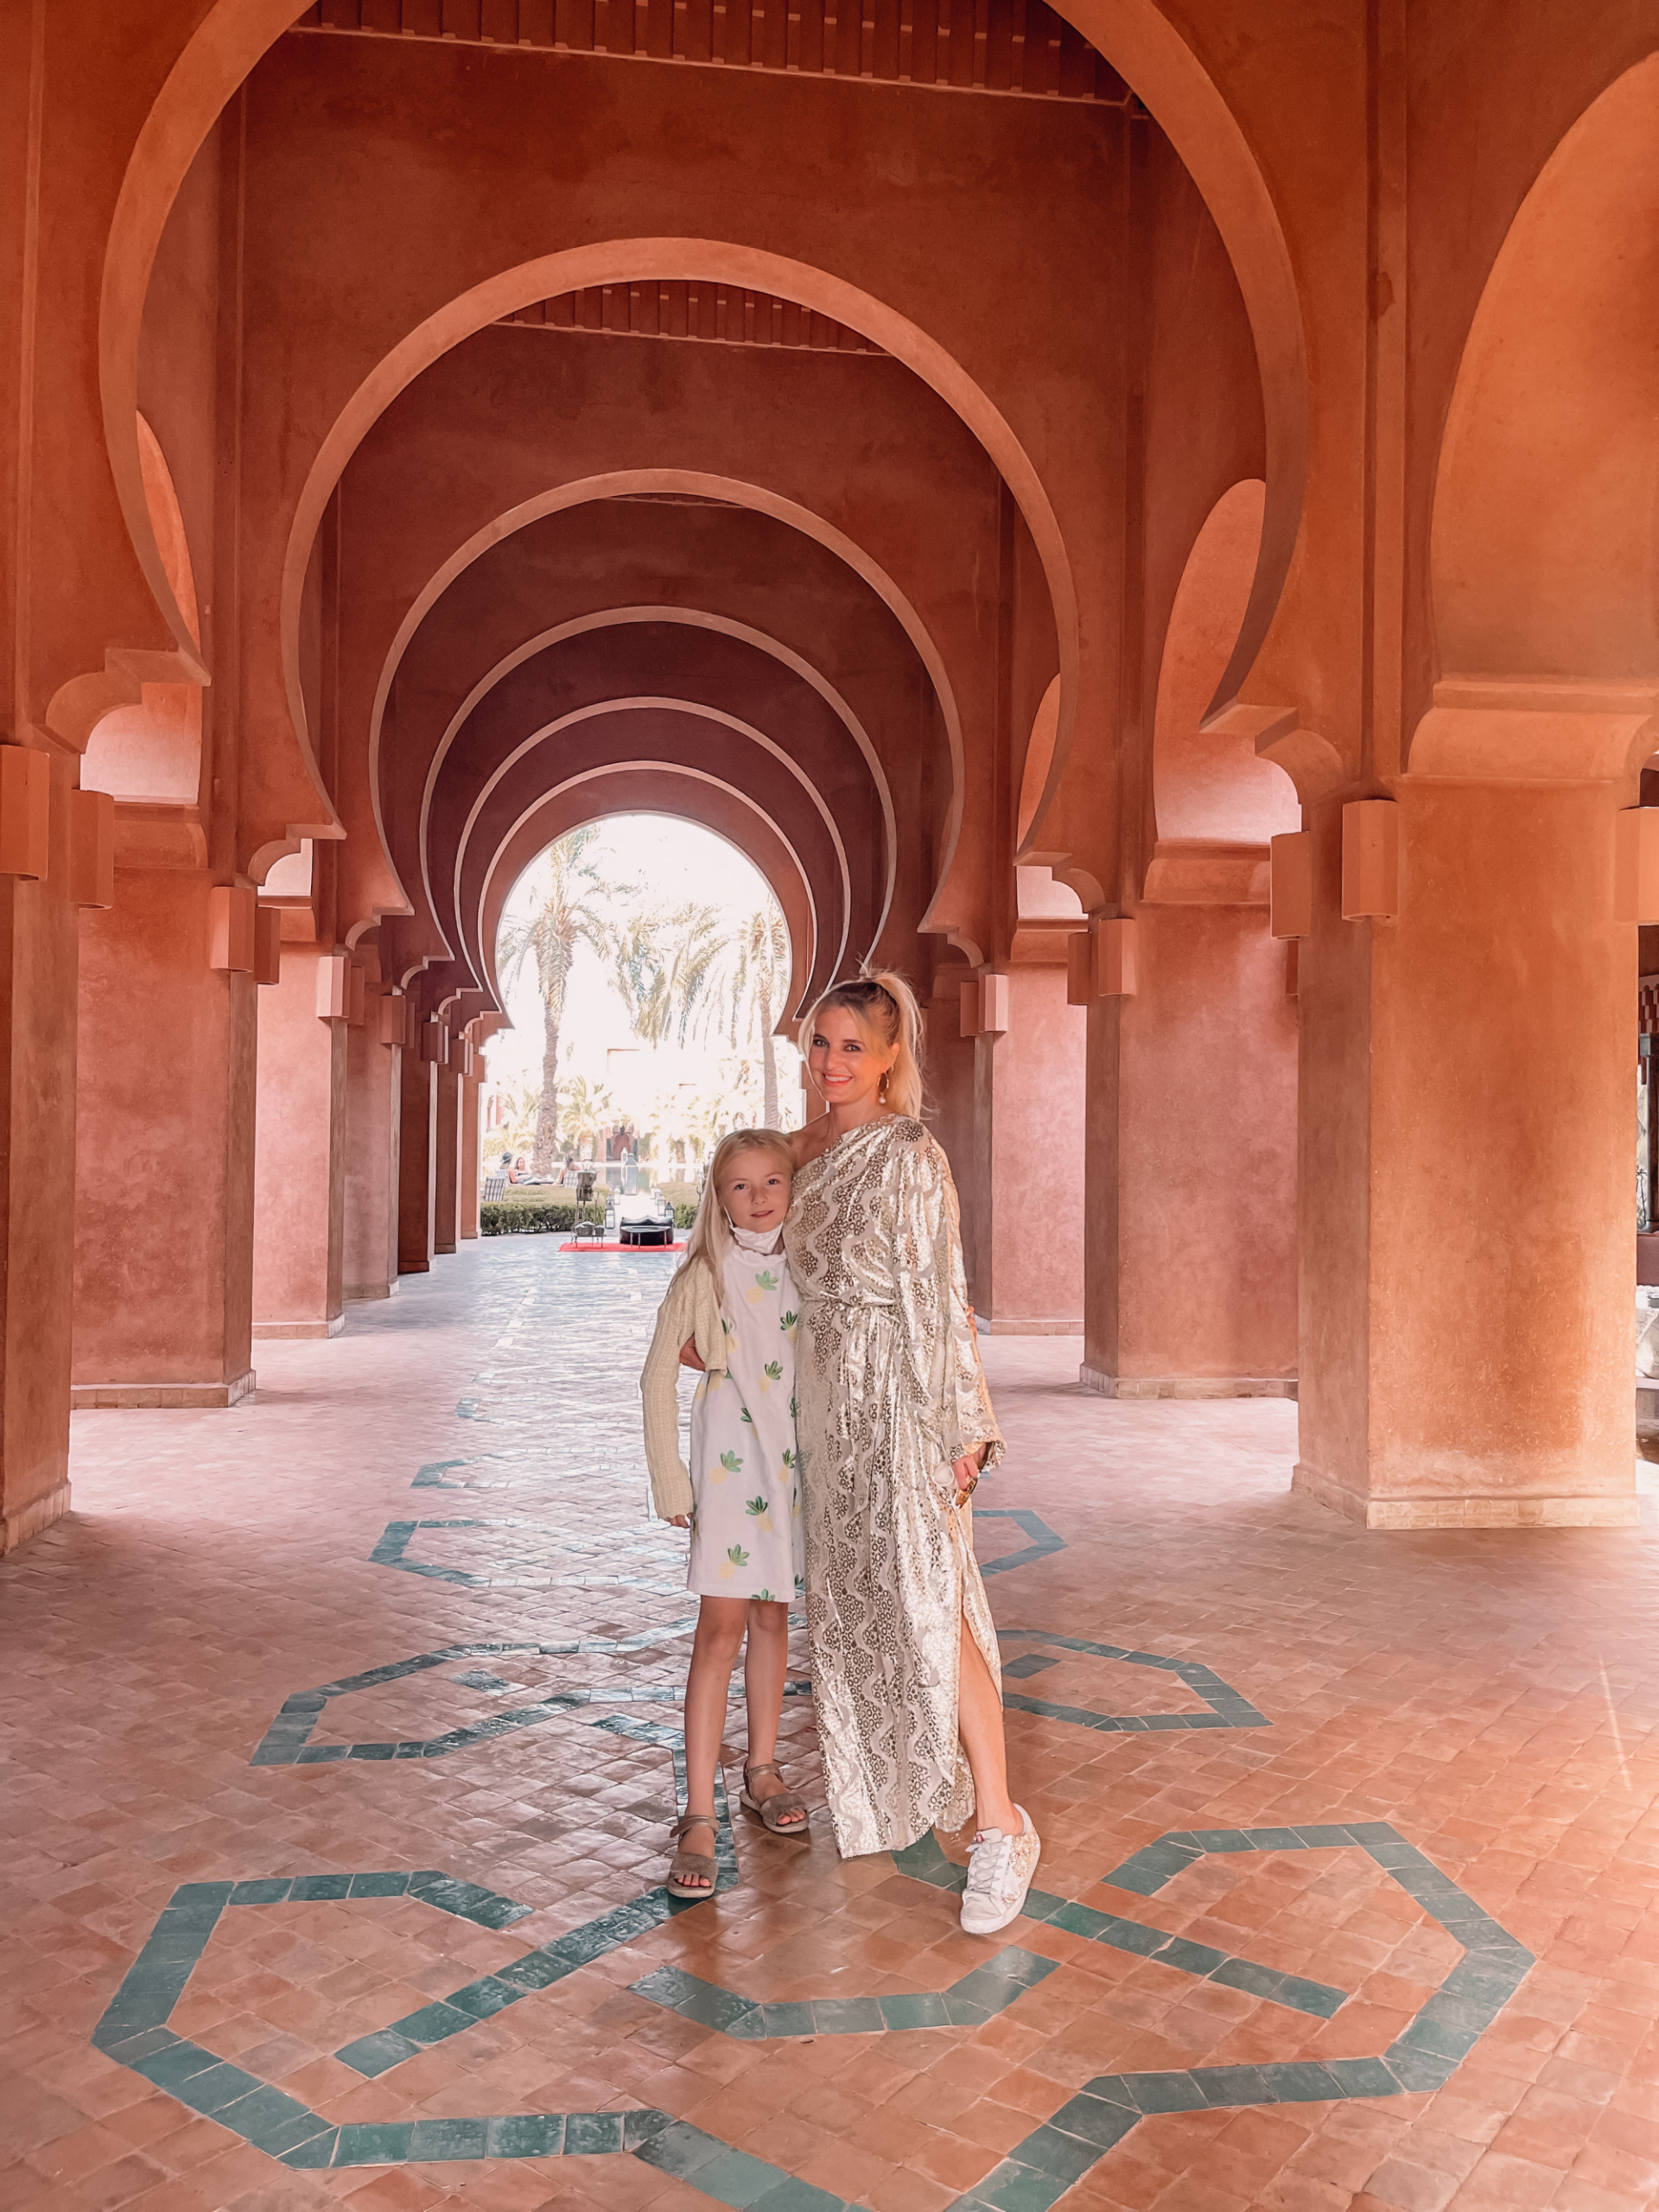 weekend trips from spain, weekend trips from madrid, where to visit near spain, best weekend trips from madrid, erin busbee, Marrakech, morocco, riding camels in morocco